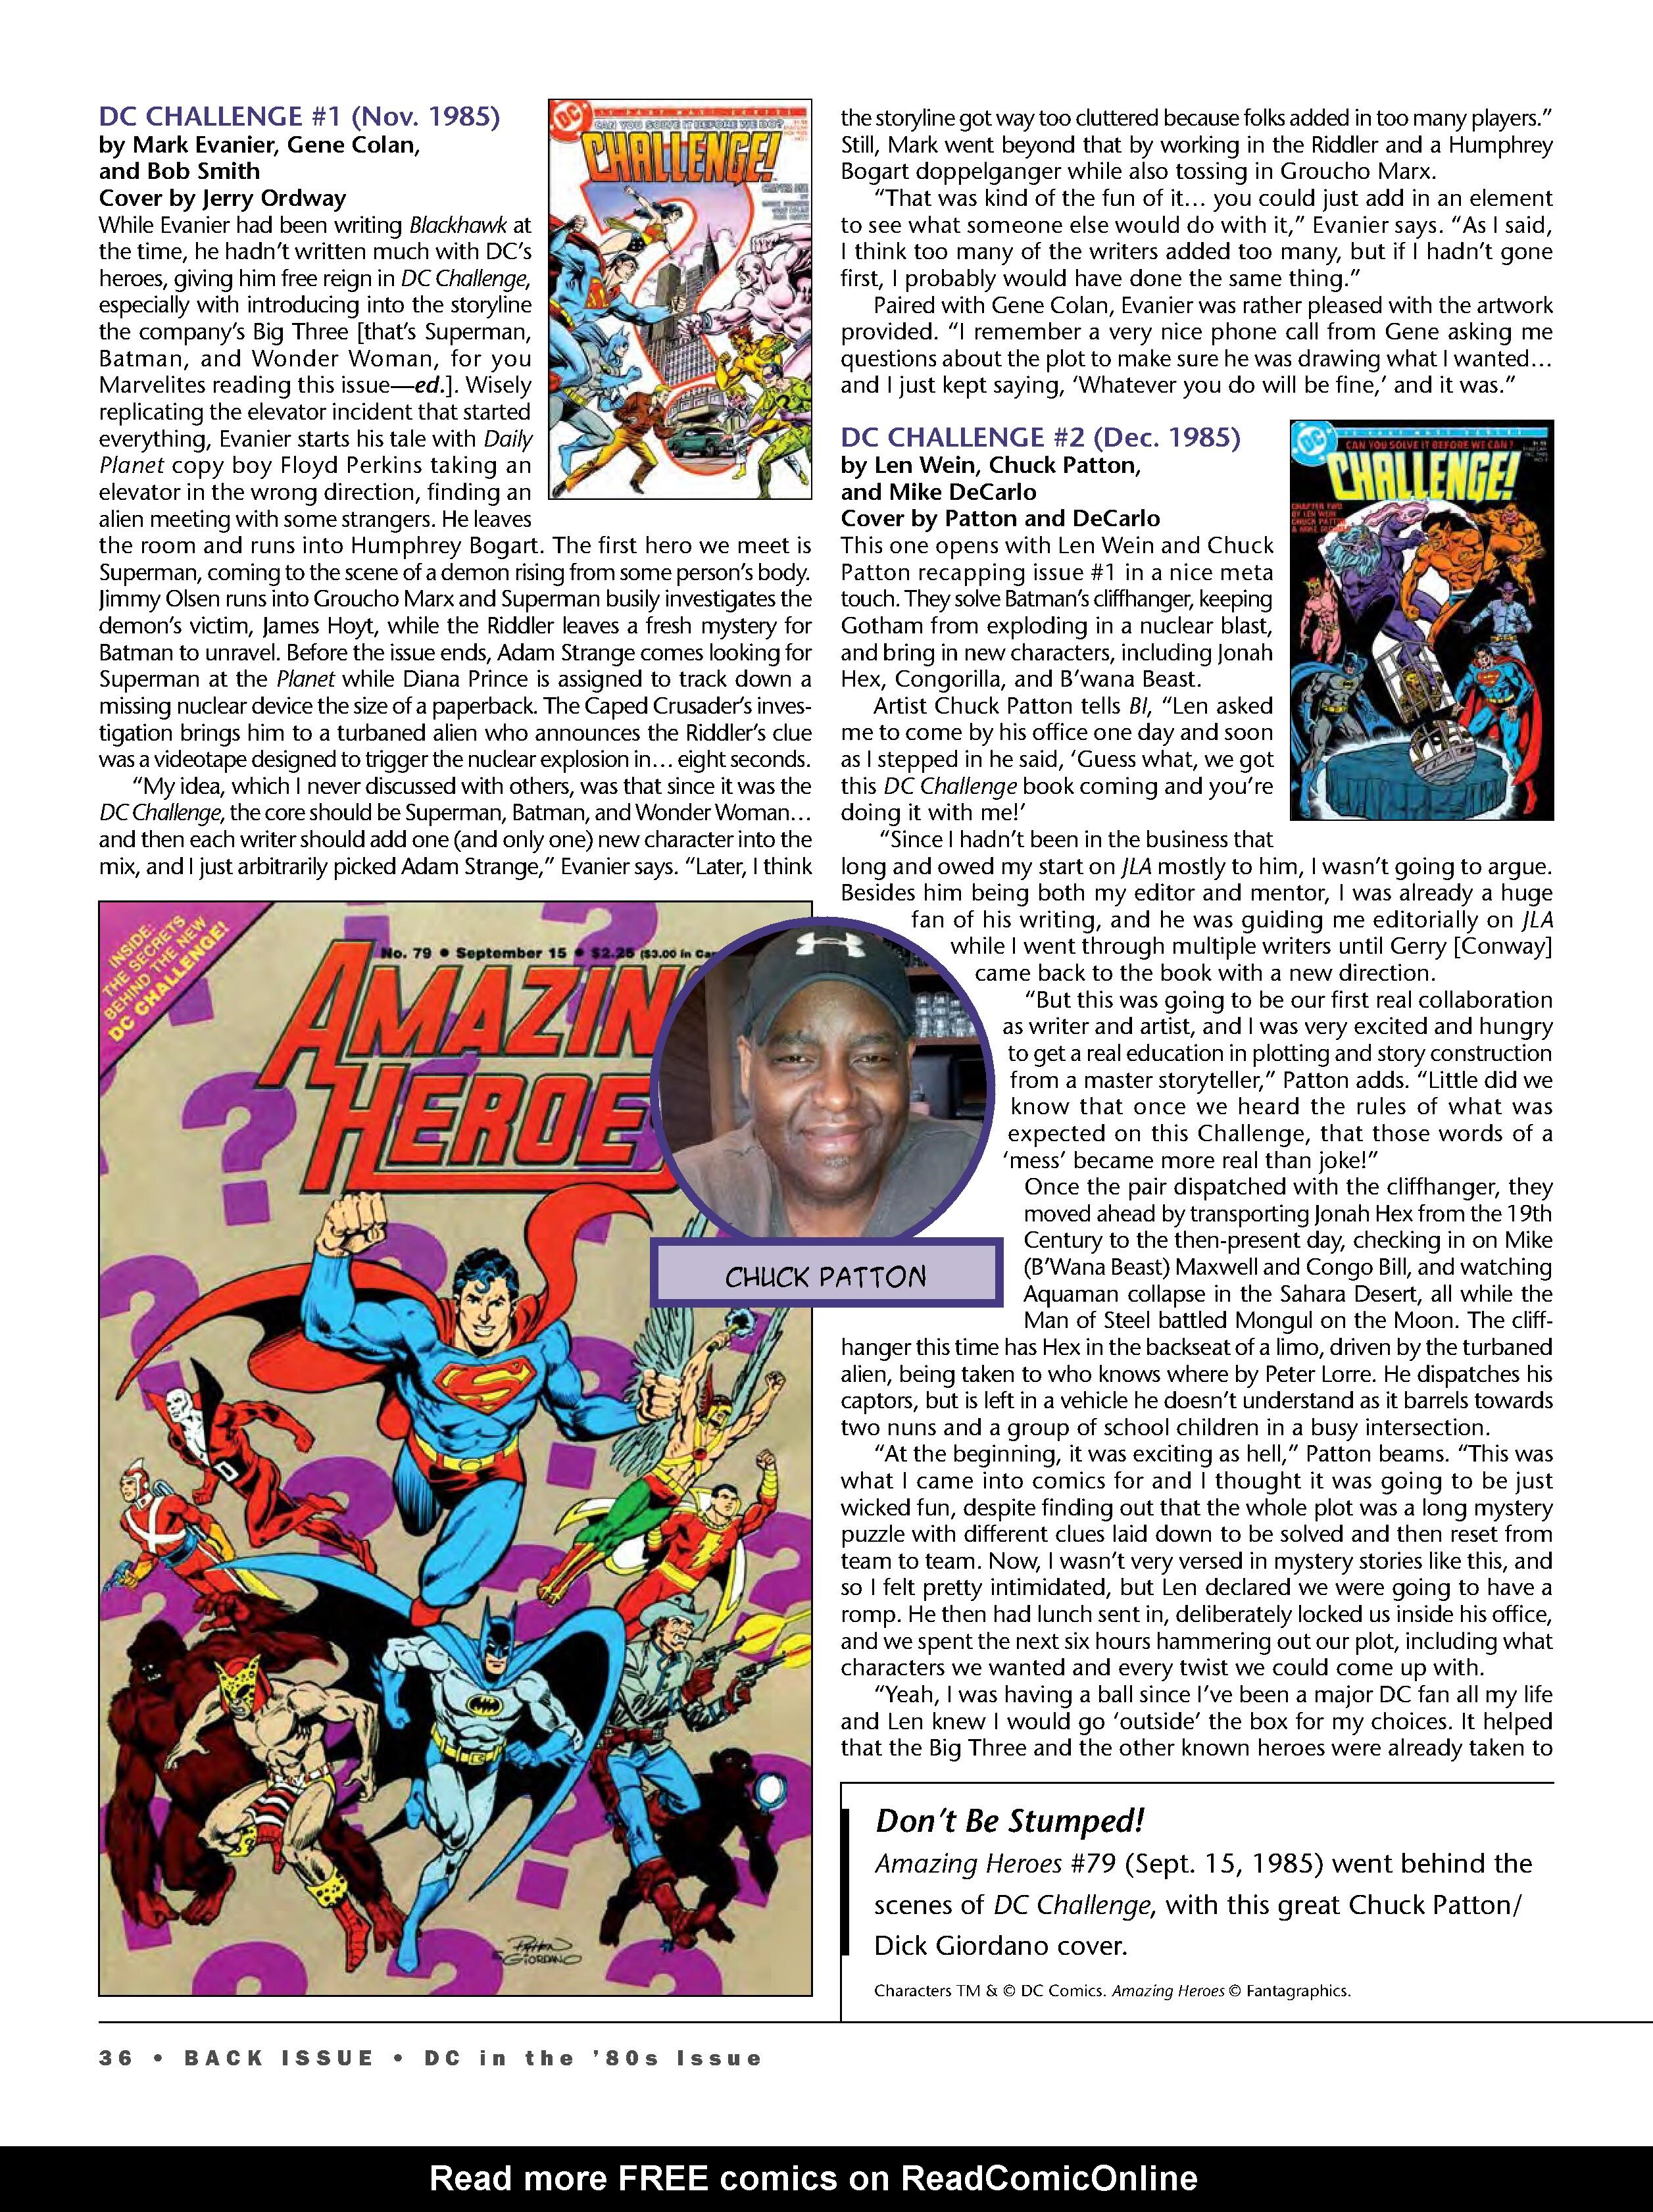 Read online Back Issue comic -  Issue #98 - 38